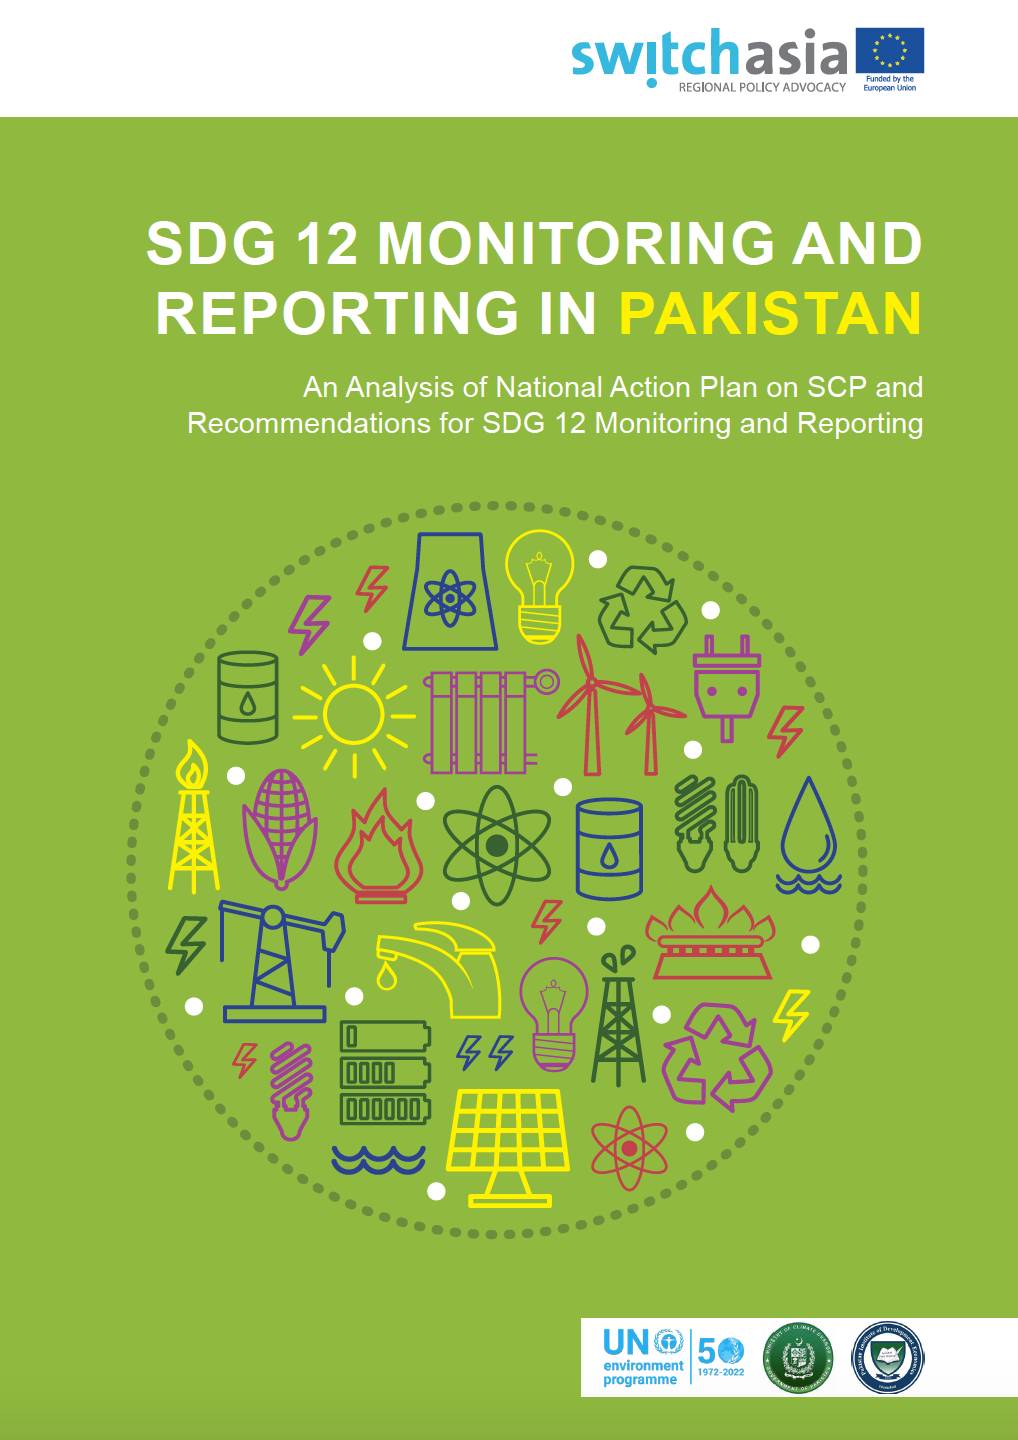 SDG 12 Monitoring and Reporting in Pakistan